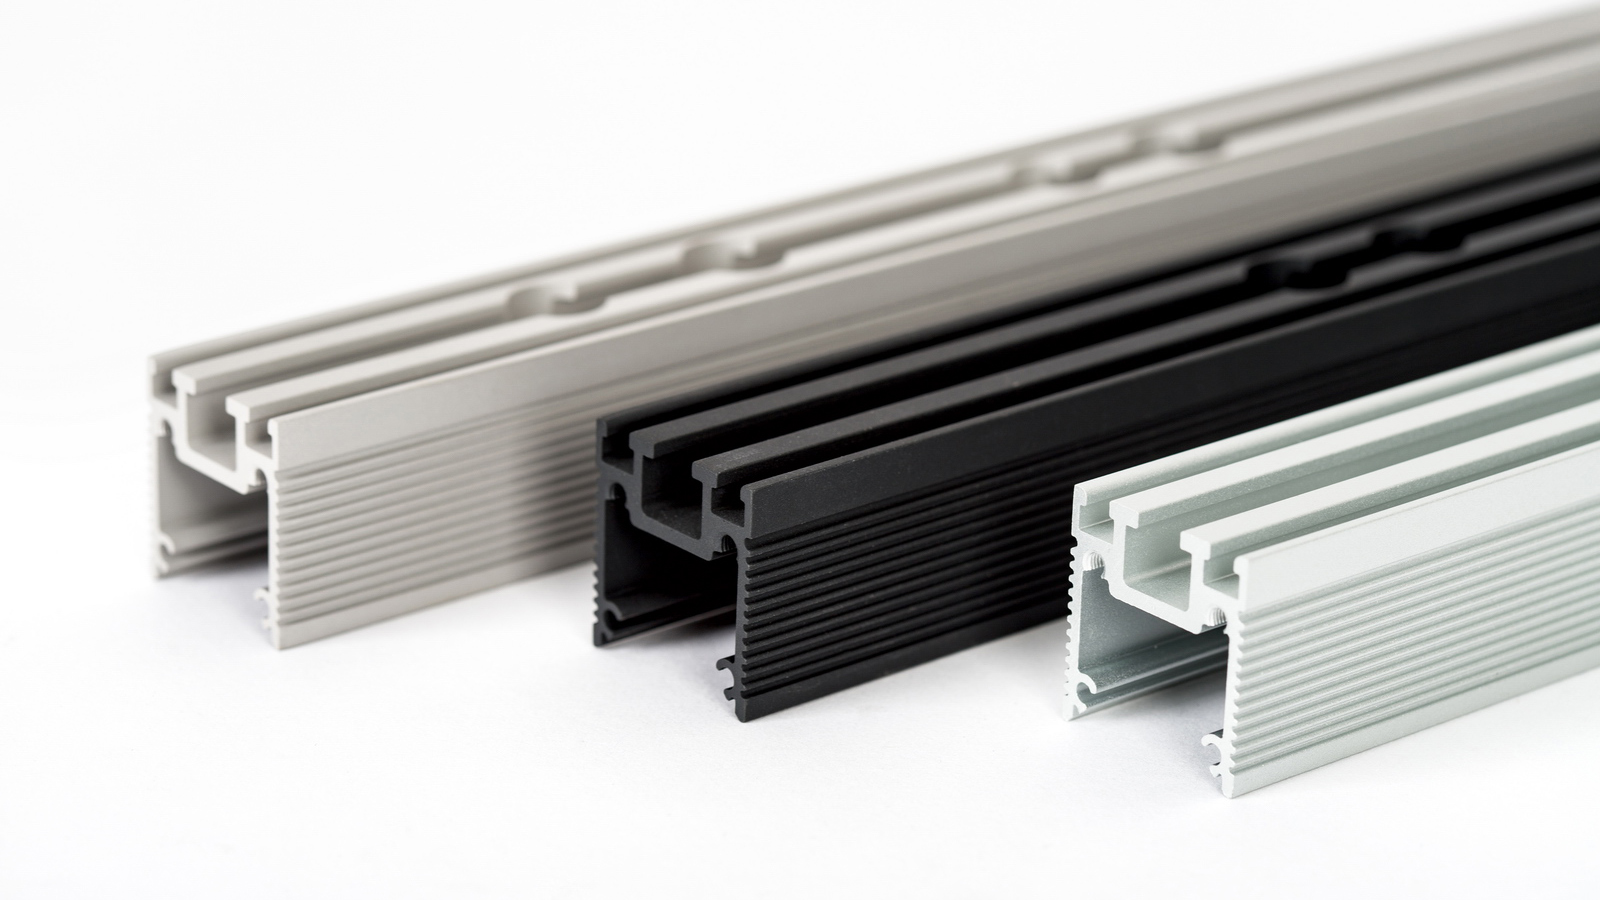 Advantages and disadvantages of plastic extrusion molding